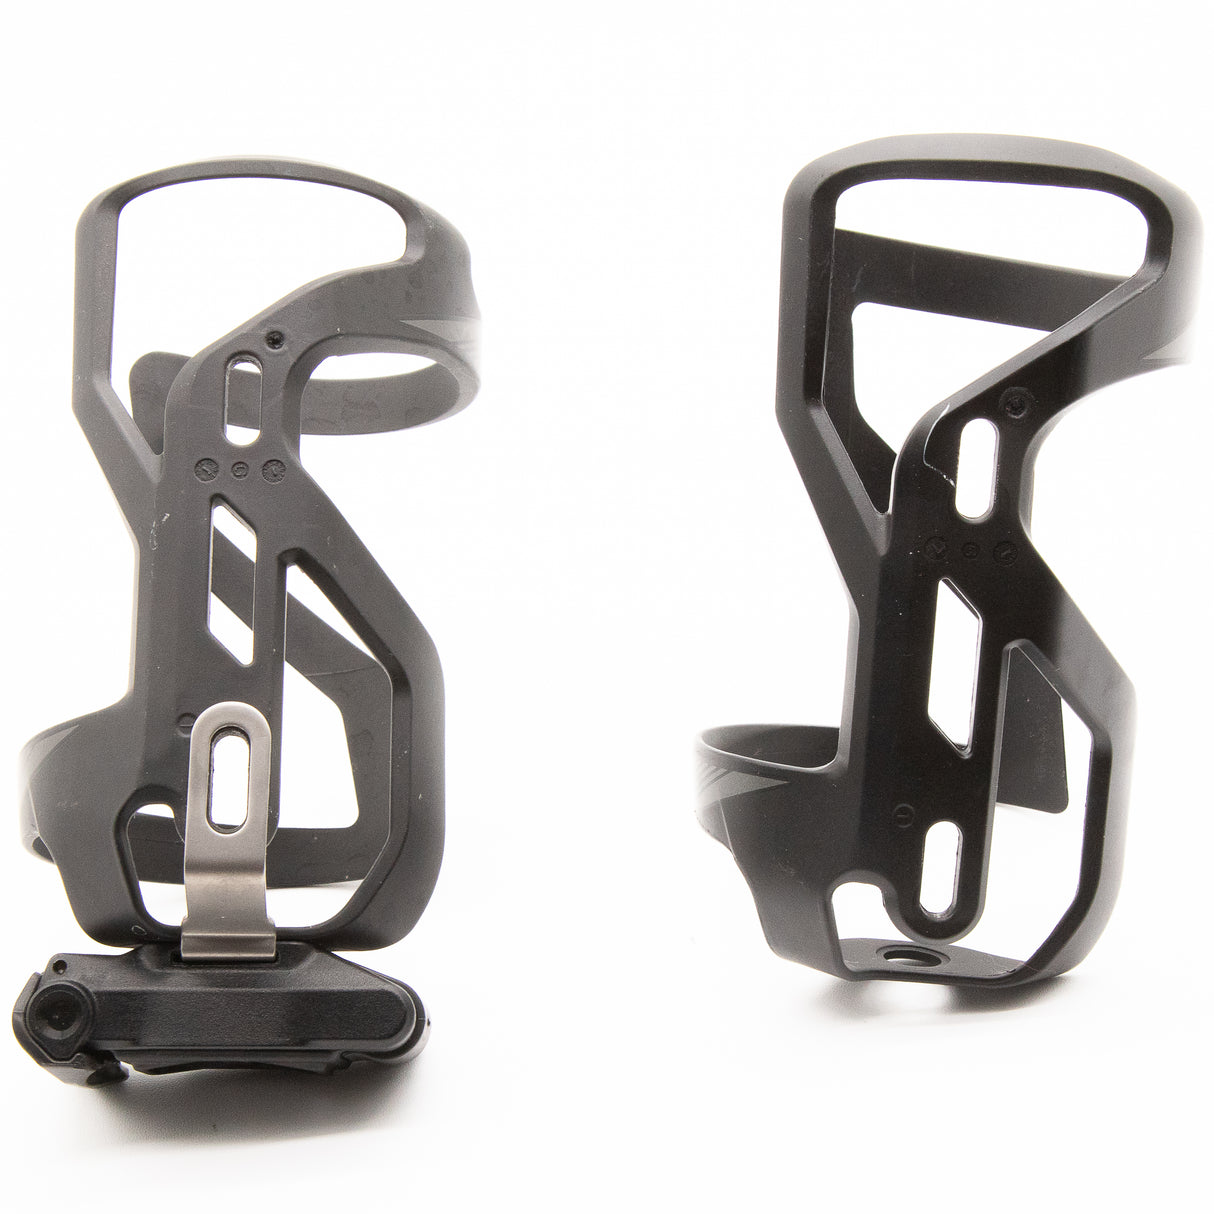 Specialized Zee II Bottle Cages Matte Black Pair With EMT tool 167g